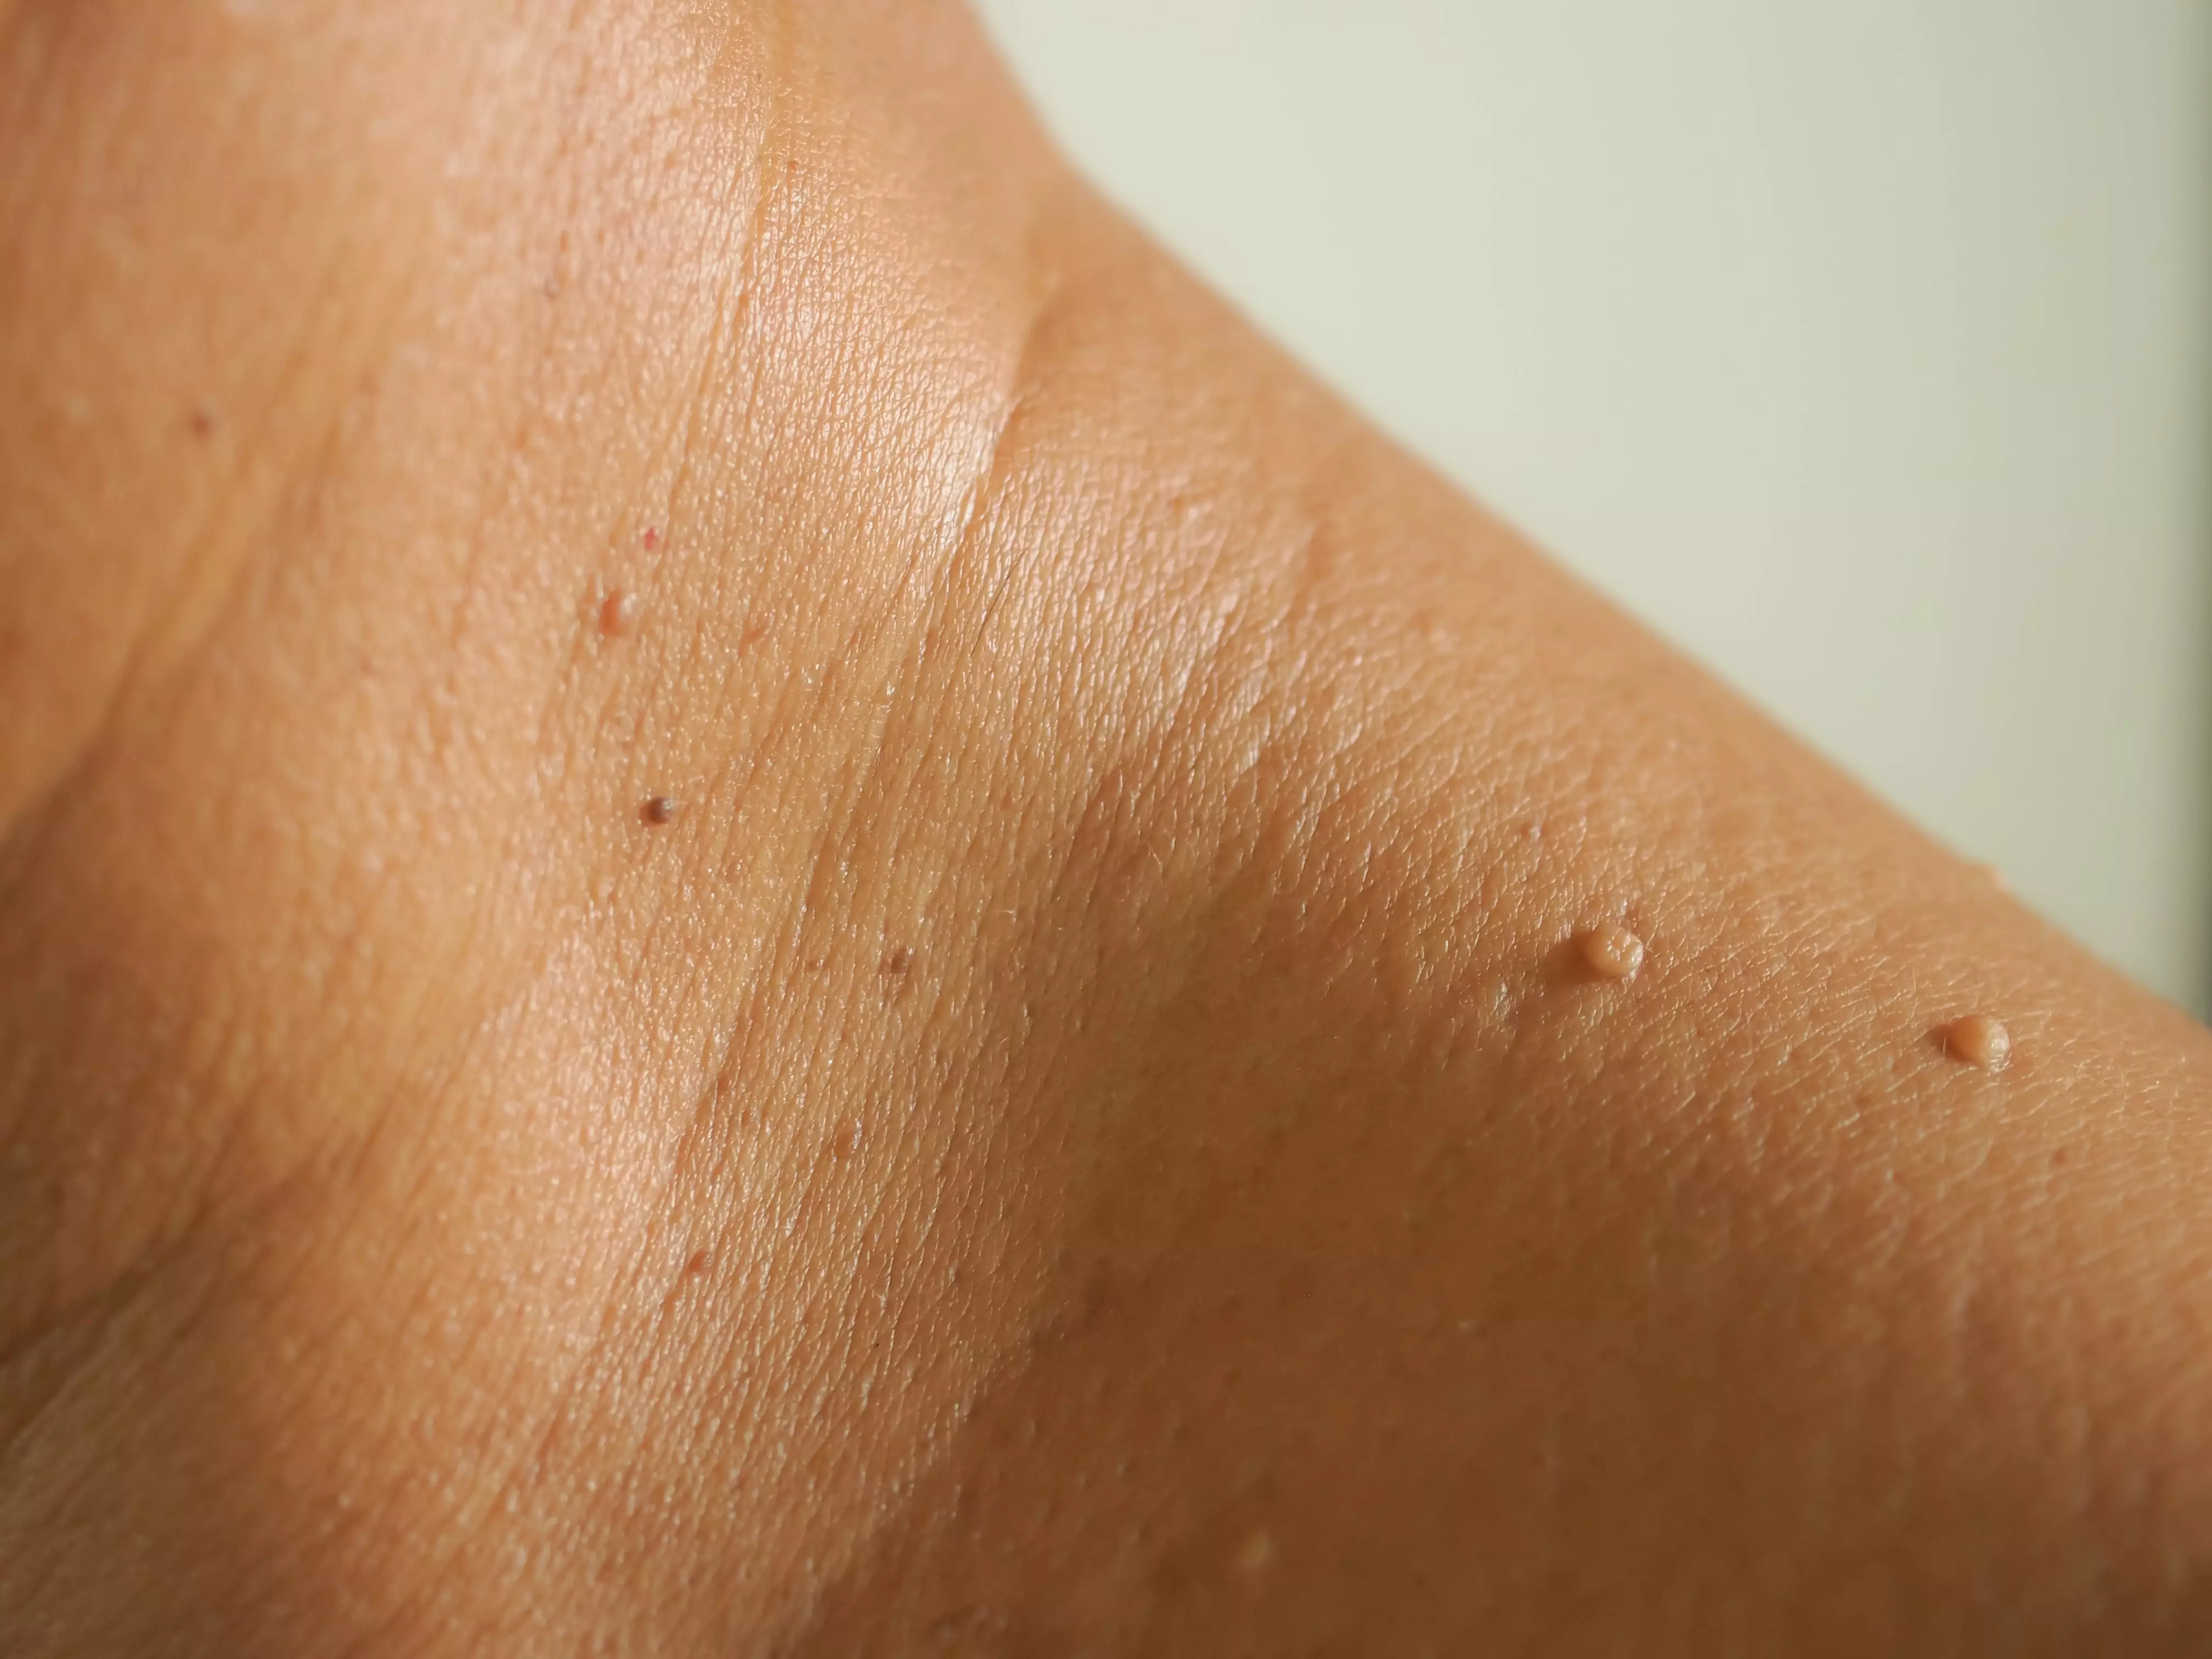 skin tag are painless, noncancerous growths on the skin, skin tag removal, 